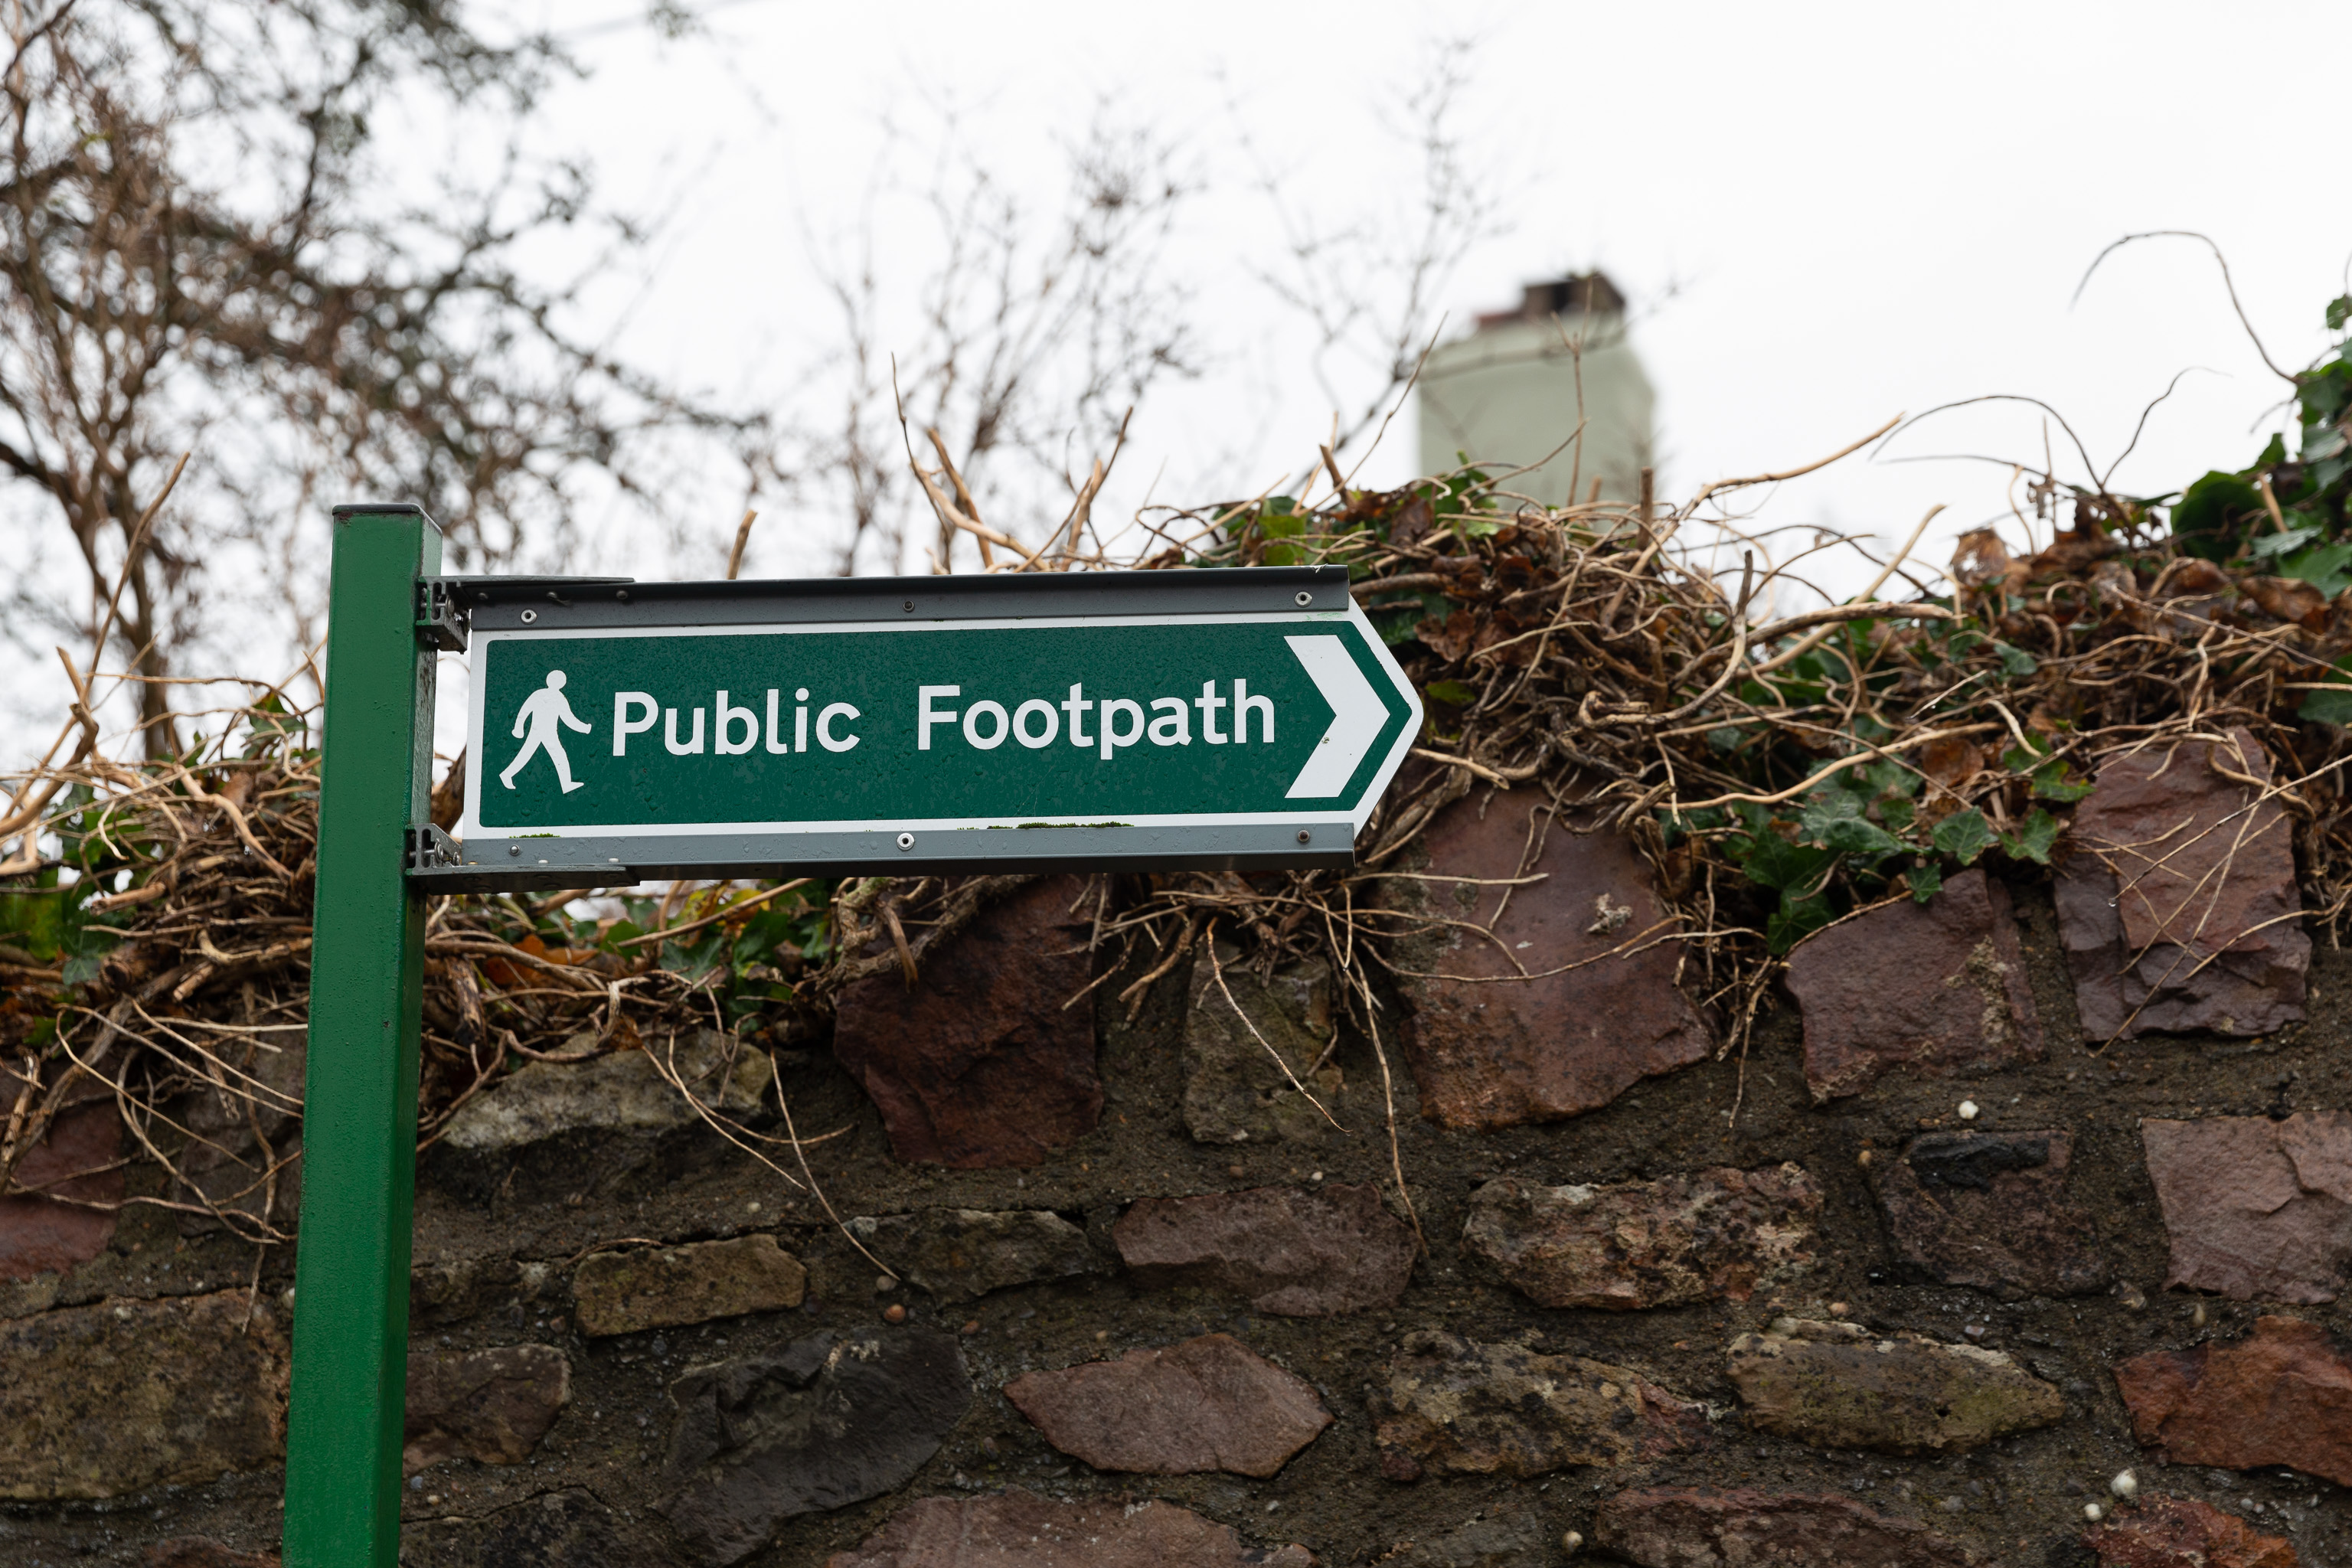 Public Footpath
It looked like there used to also be a sign from the side we came in, but at least finding this a the other end was a reassurance that we weren't t...